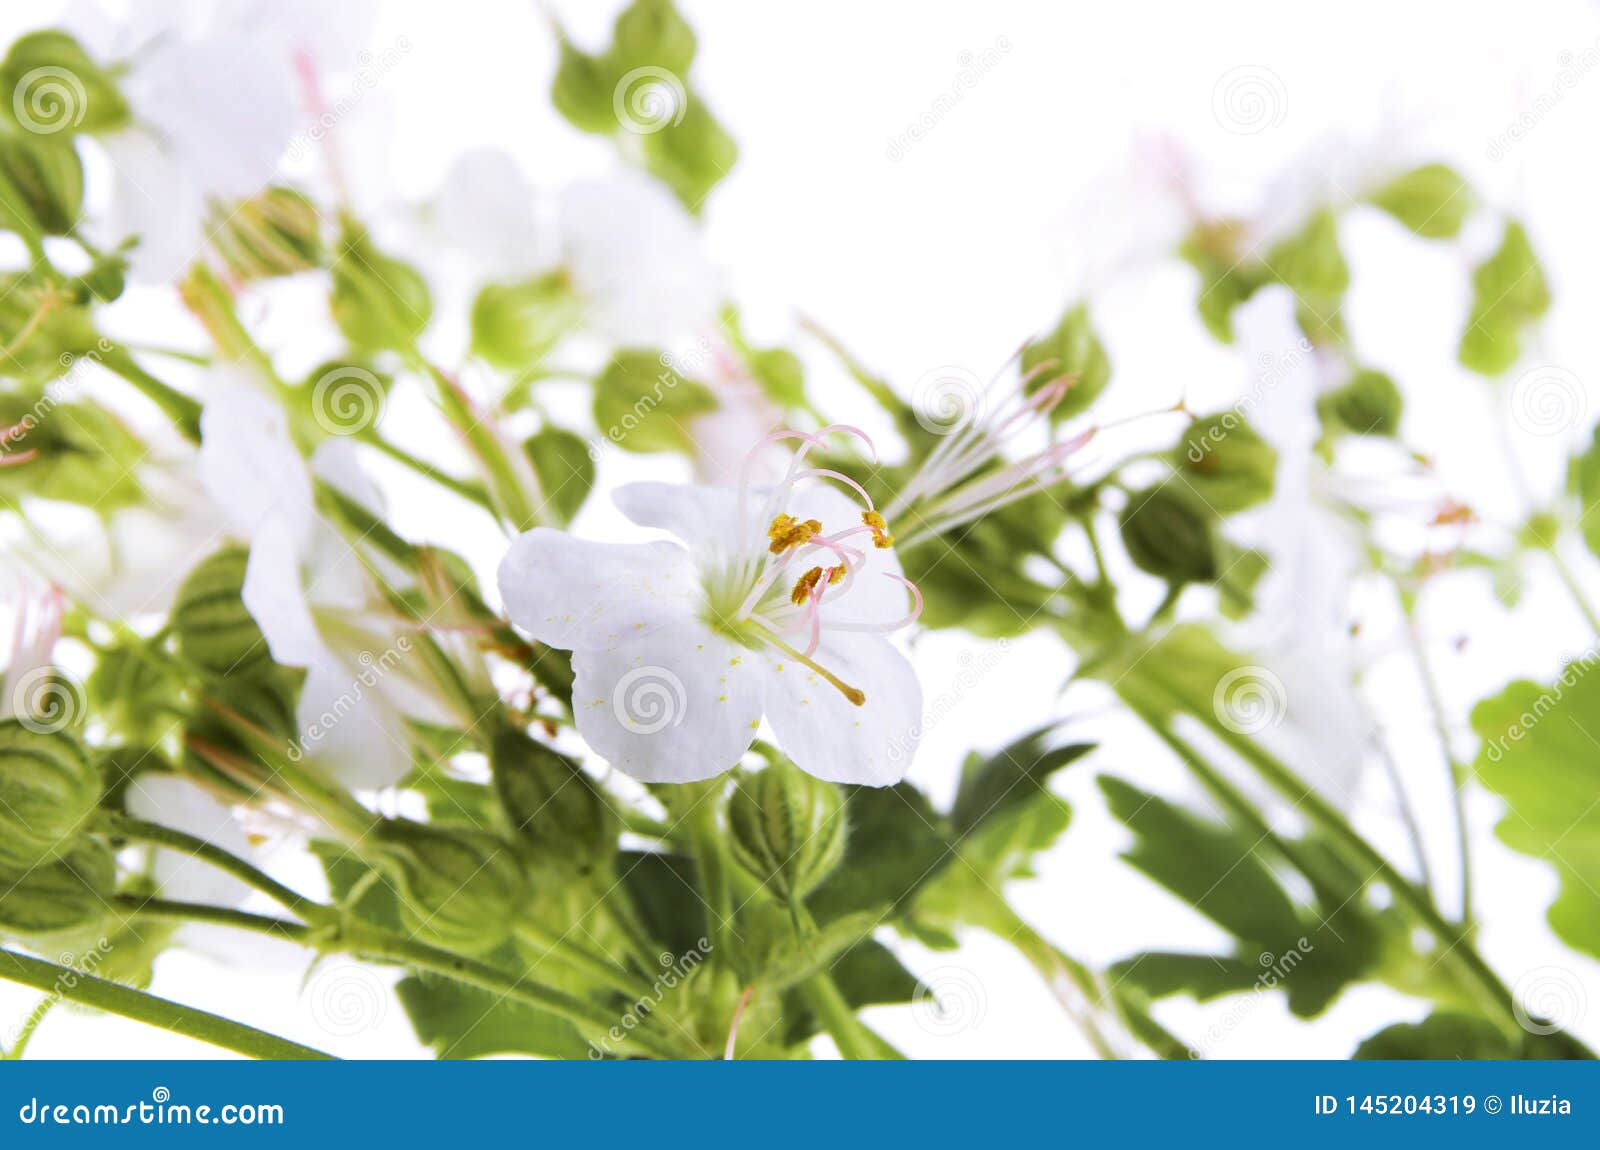 Close Up Of White Bigroot Geranium Flowers On An Isolated White Background Stock Image Image Of Close Isolated 145204319